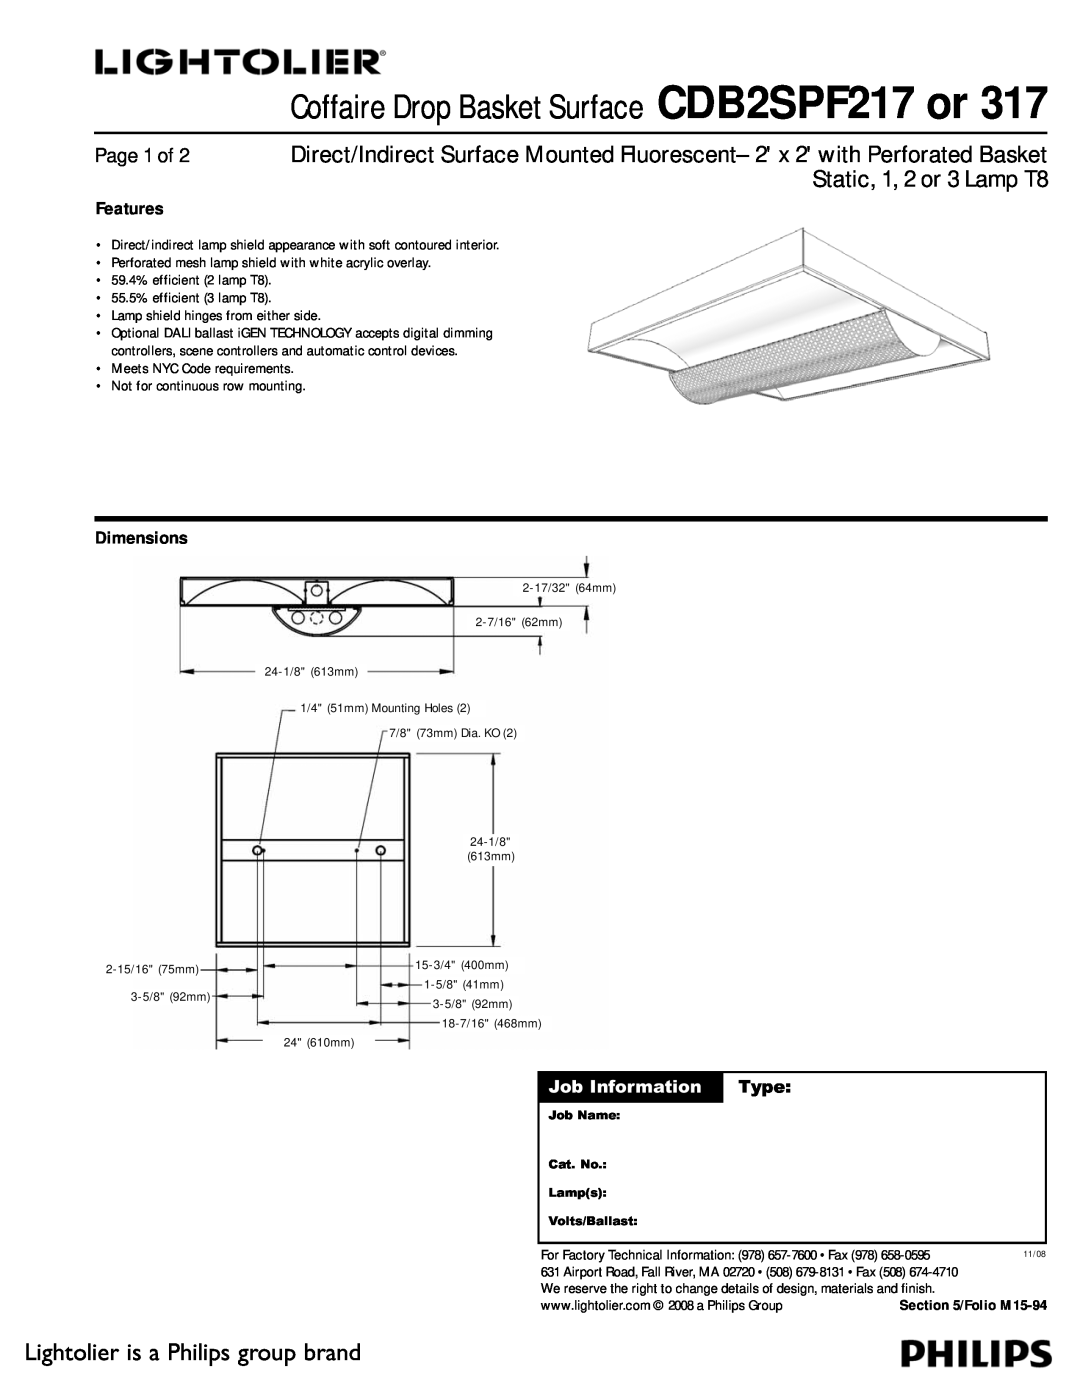 Lightolier CDB2SPF317 dimensions Coffaire Drop Basket Surface CDB2SPF217 or, Static, 1, 2 or 3 Lamp T8, Page 1 of, Type 